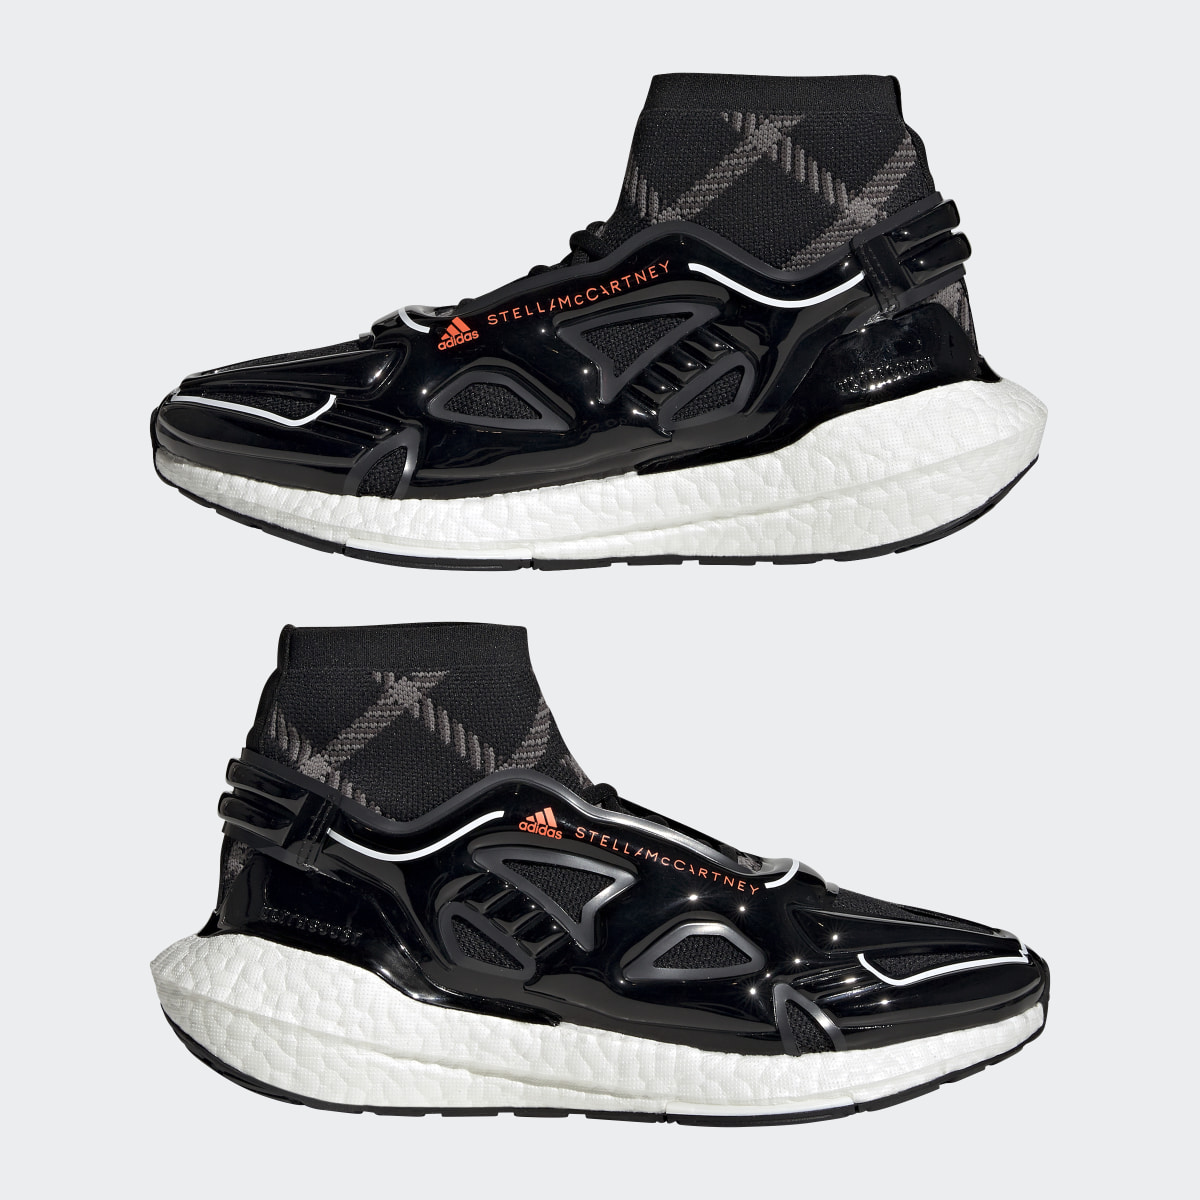 Adidas by Stella McCartney Ultraboost 22 Elevated Shoes. 8